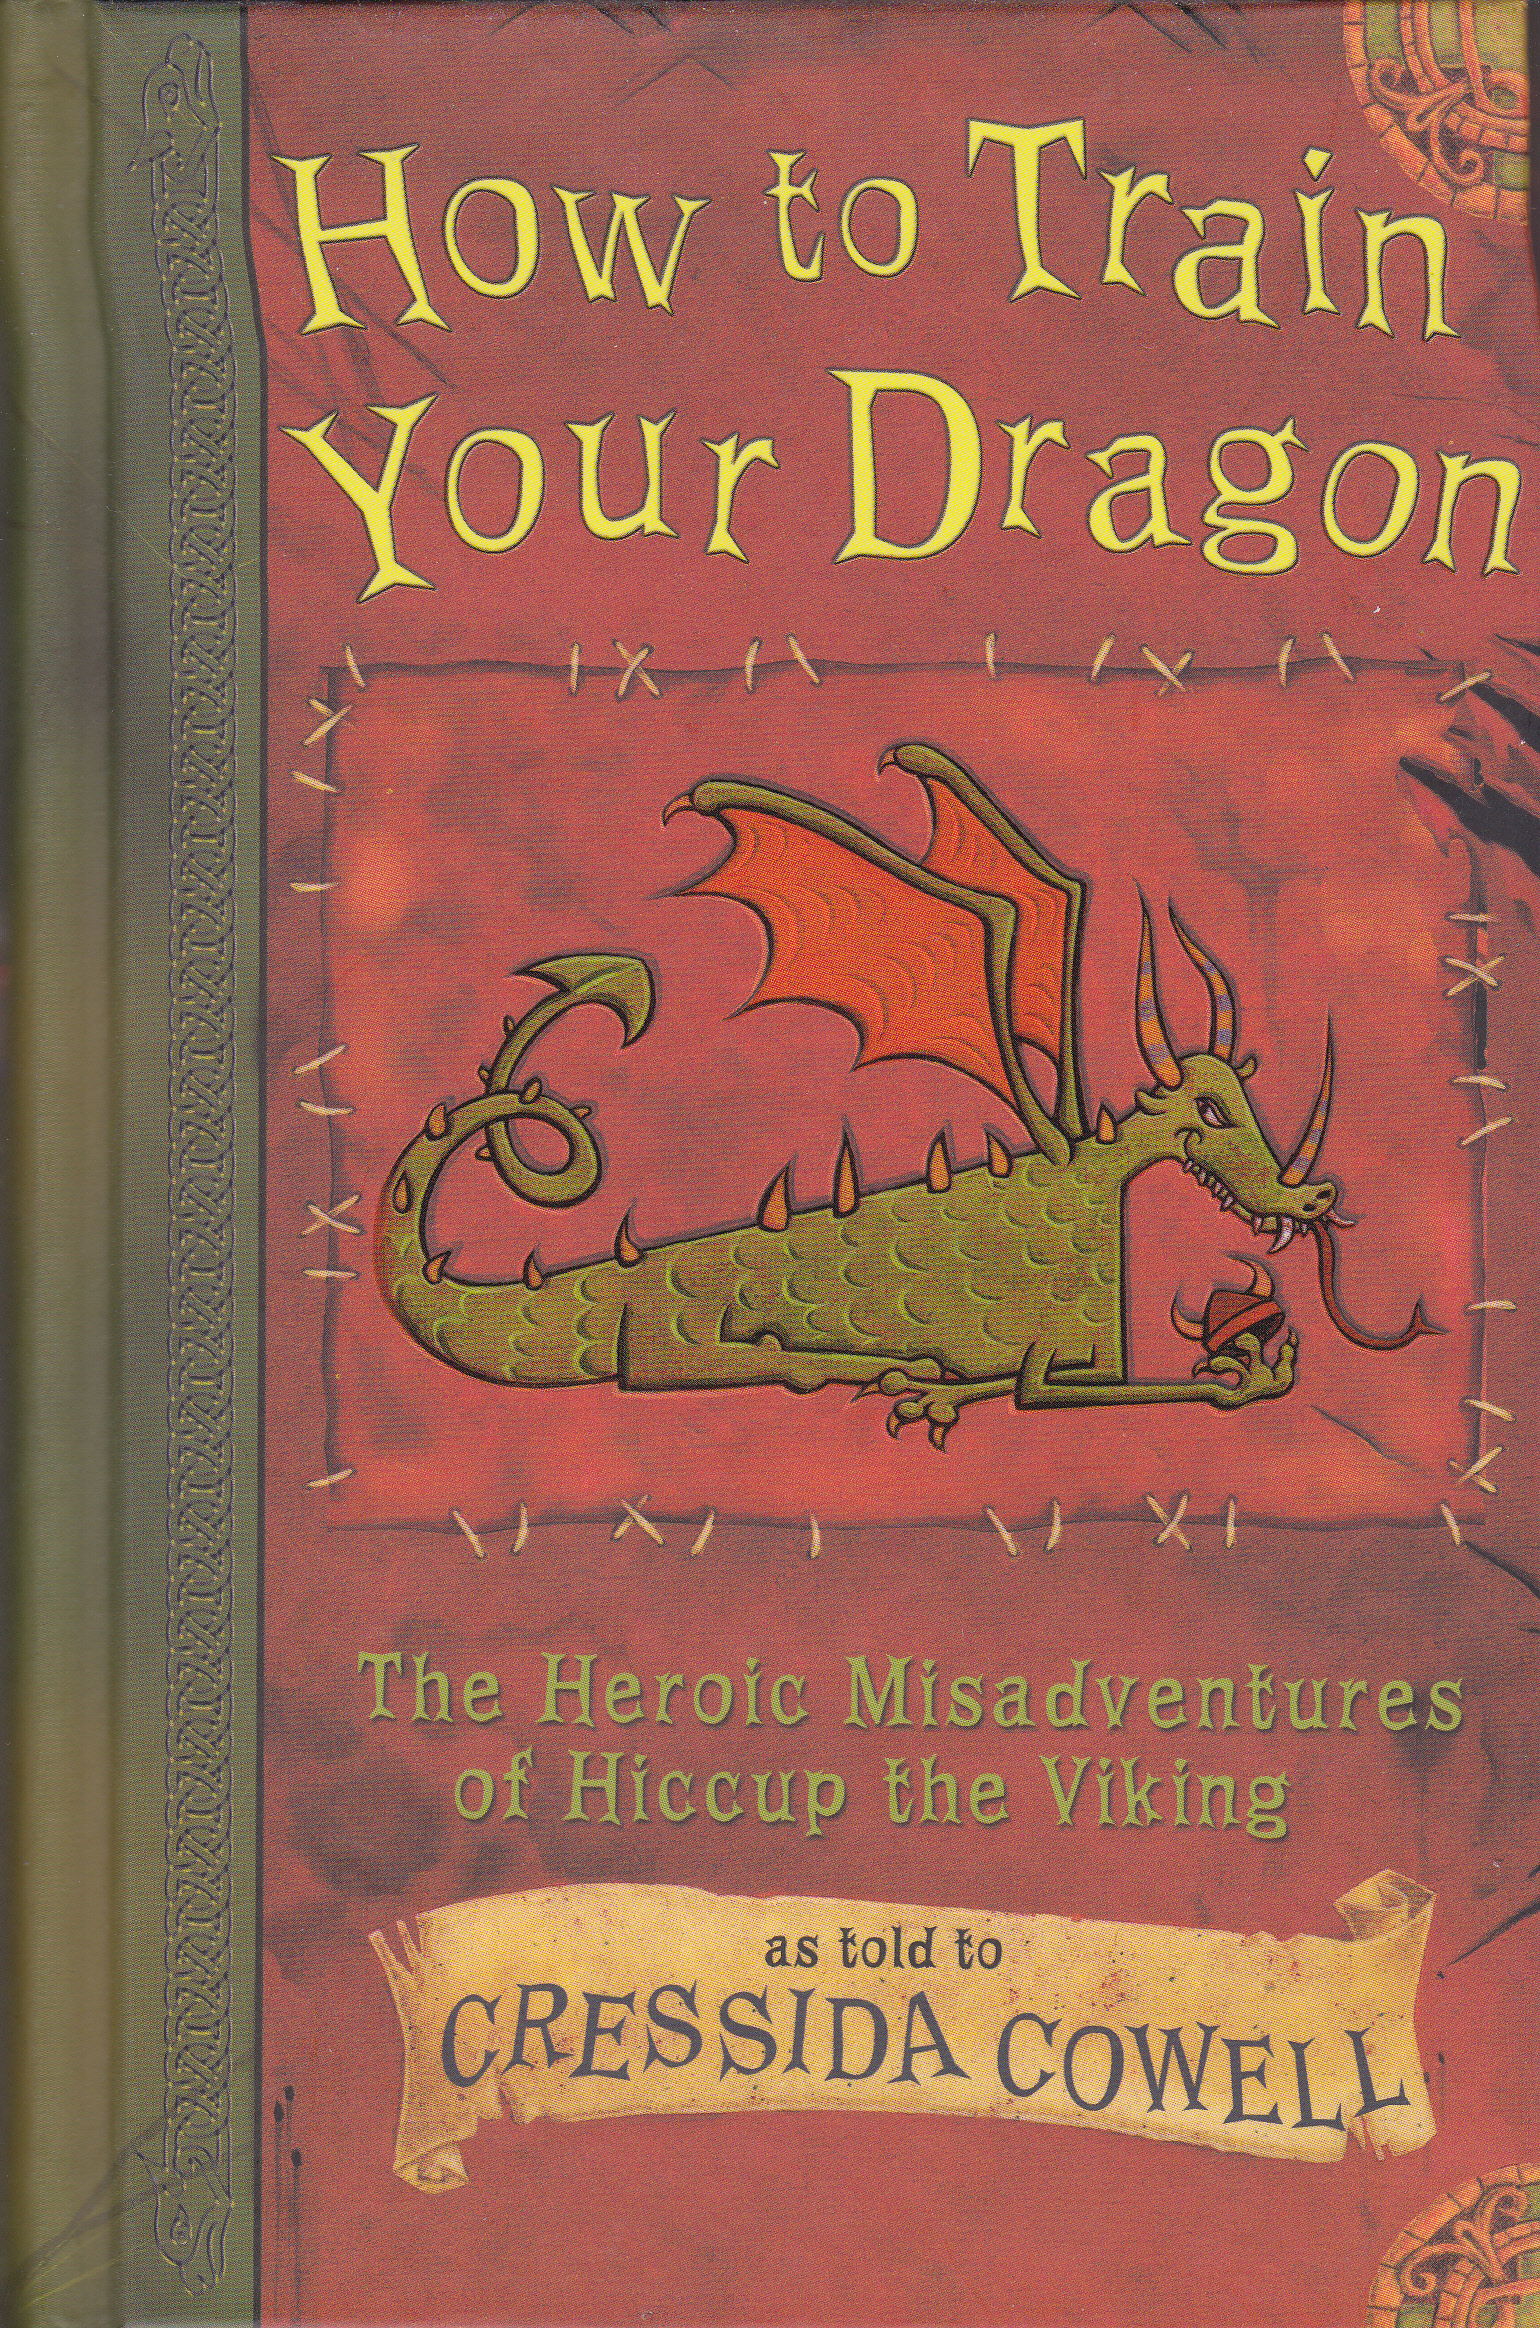 How to Train Your Dragon By Cressida Cowell